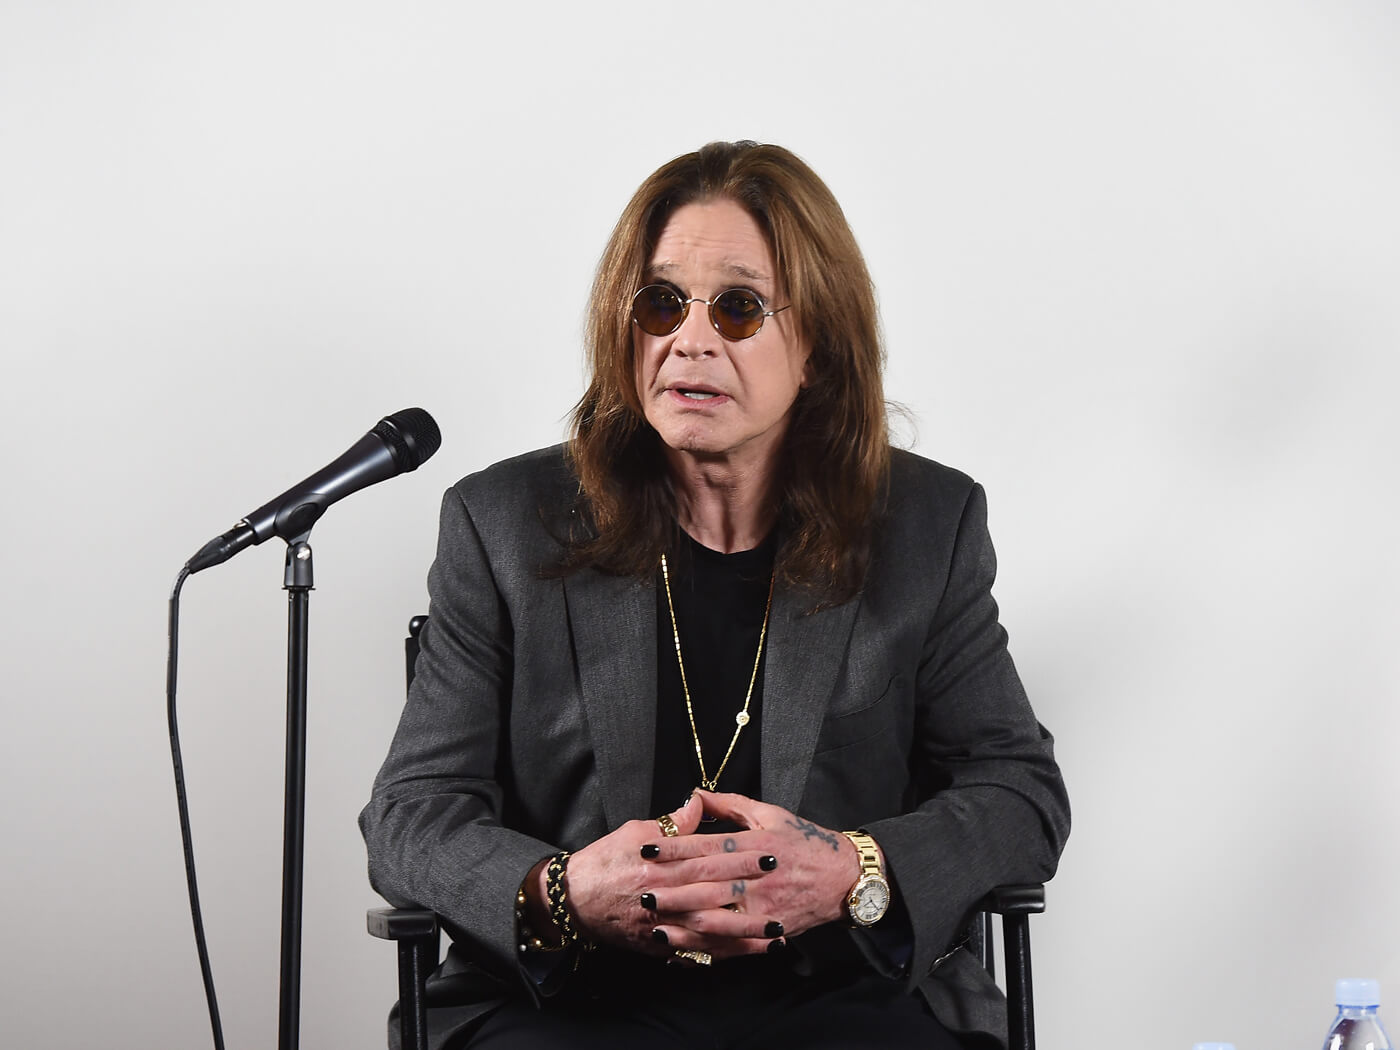 Ozzy Osbourne at a February 2018 press conference in his Los Angeles home